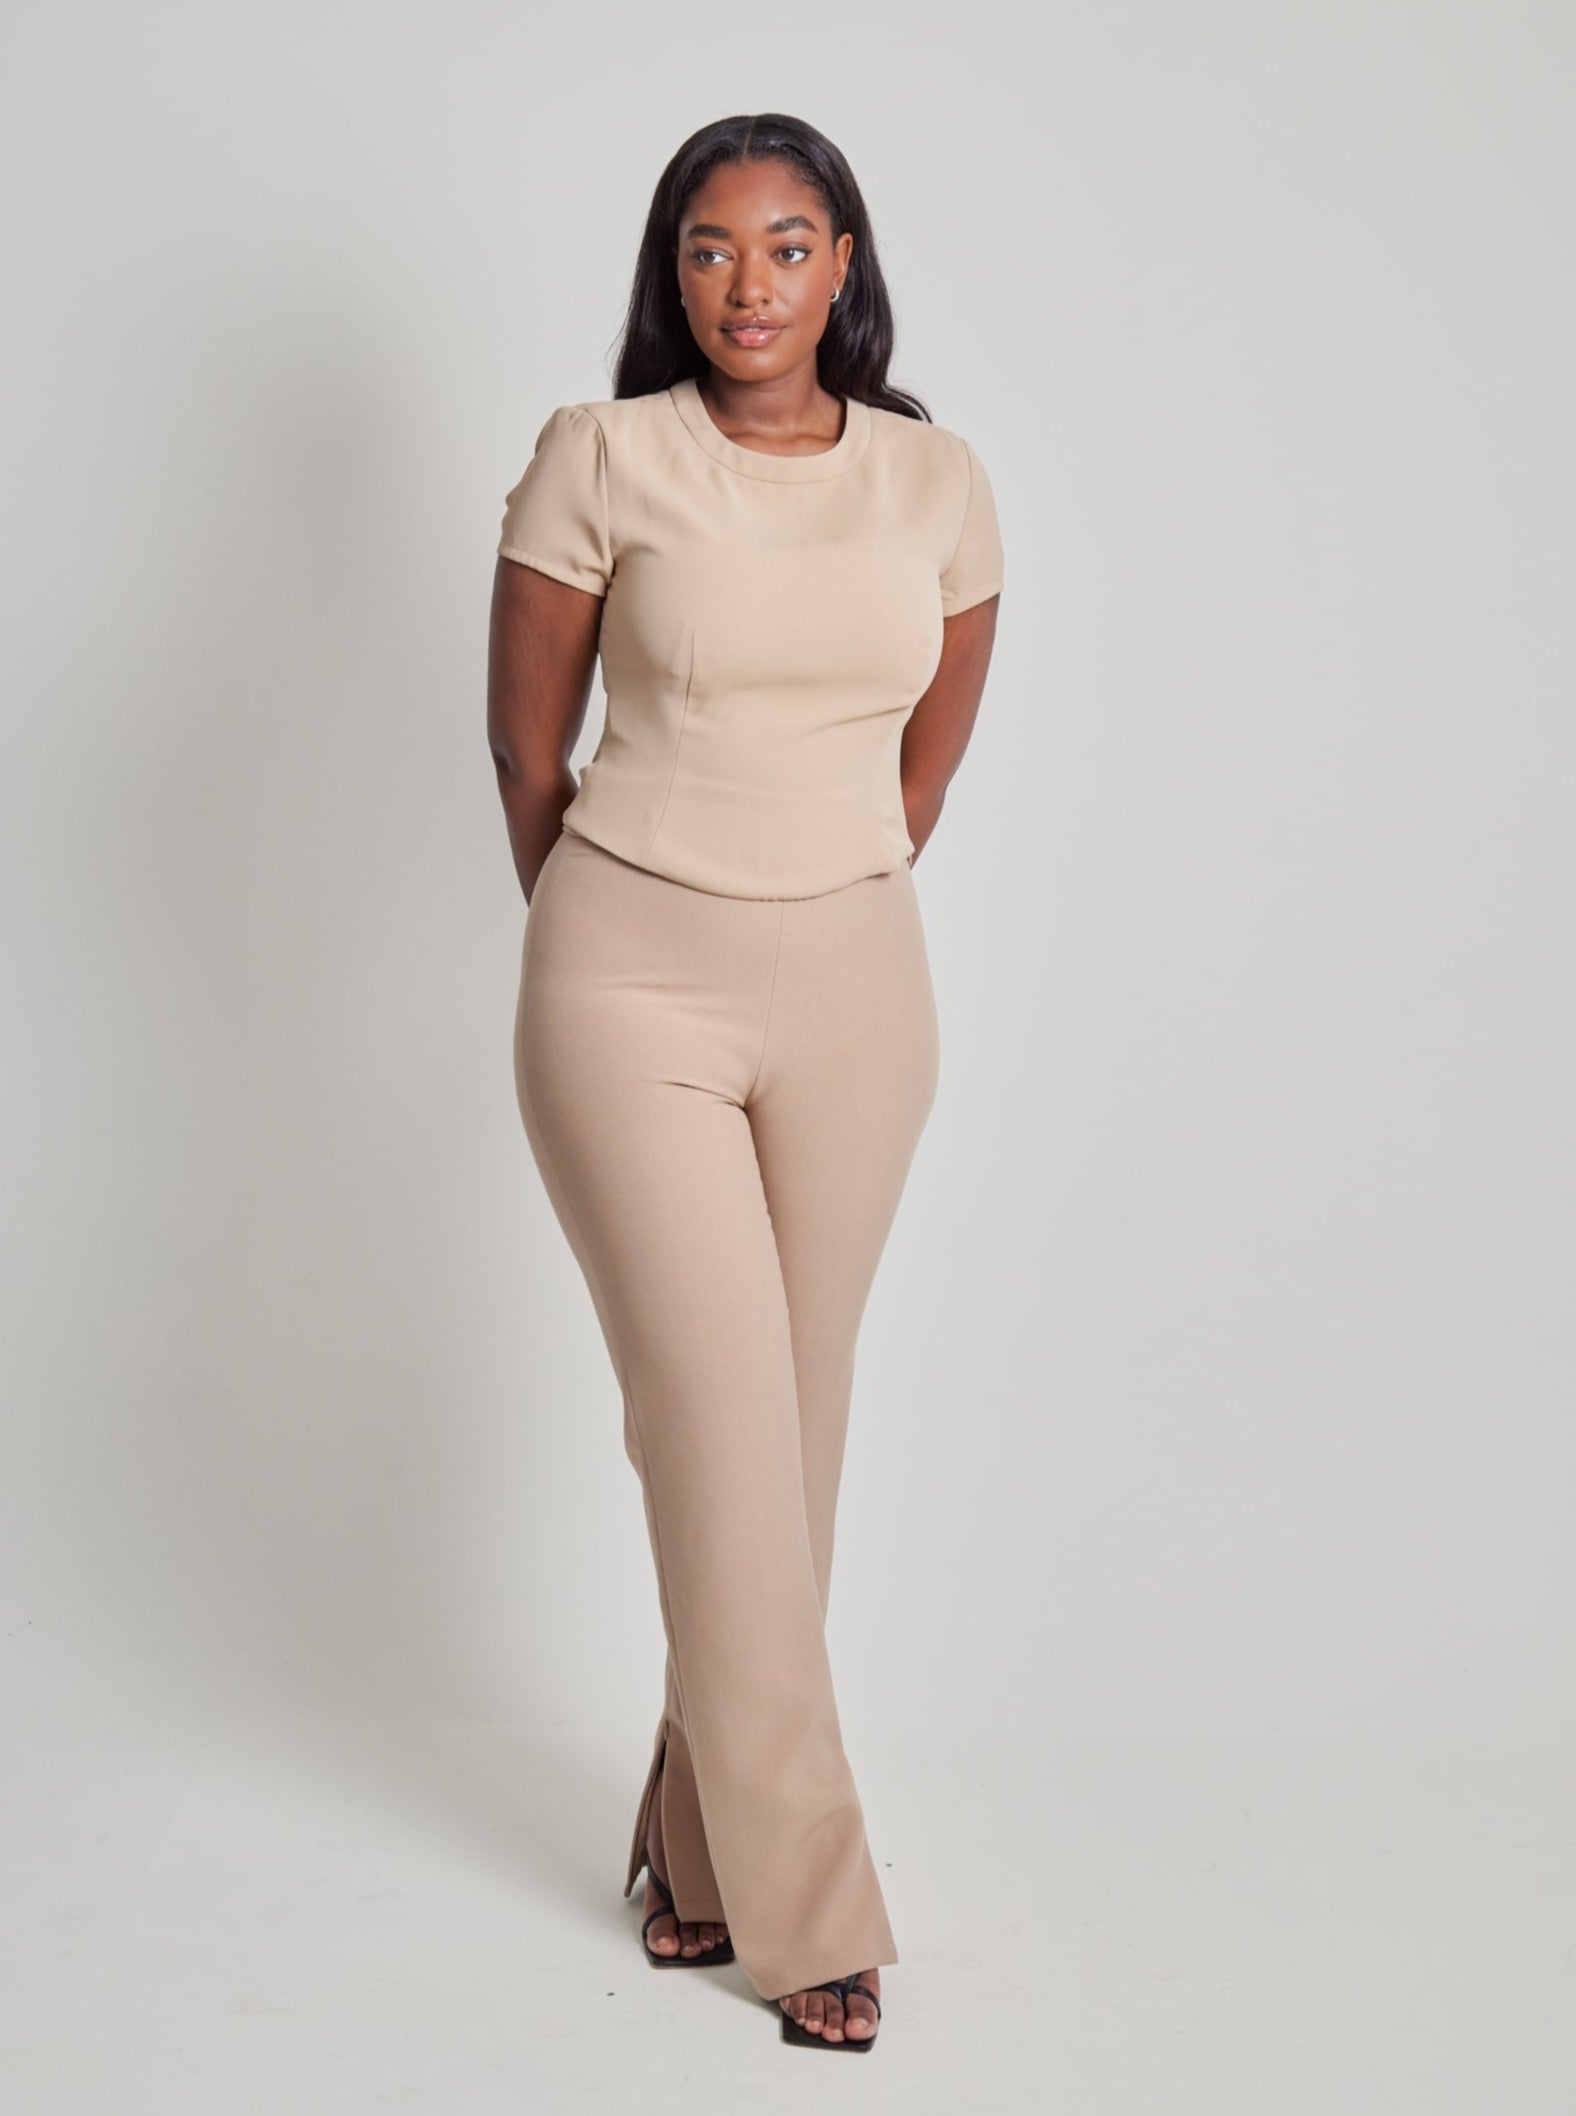 Tansy Pleated Twill Trousers - Camel – The Frankie Shop